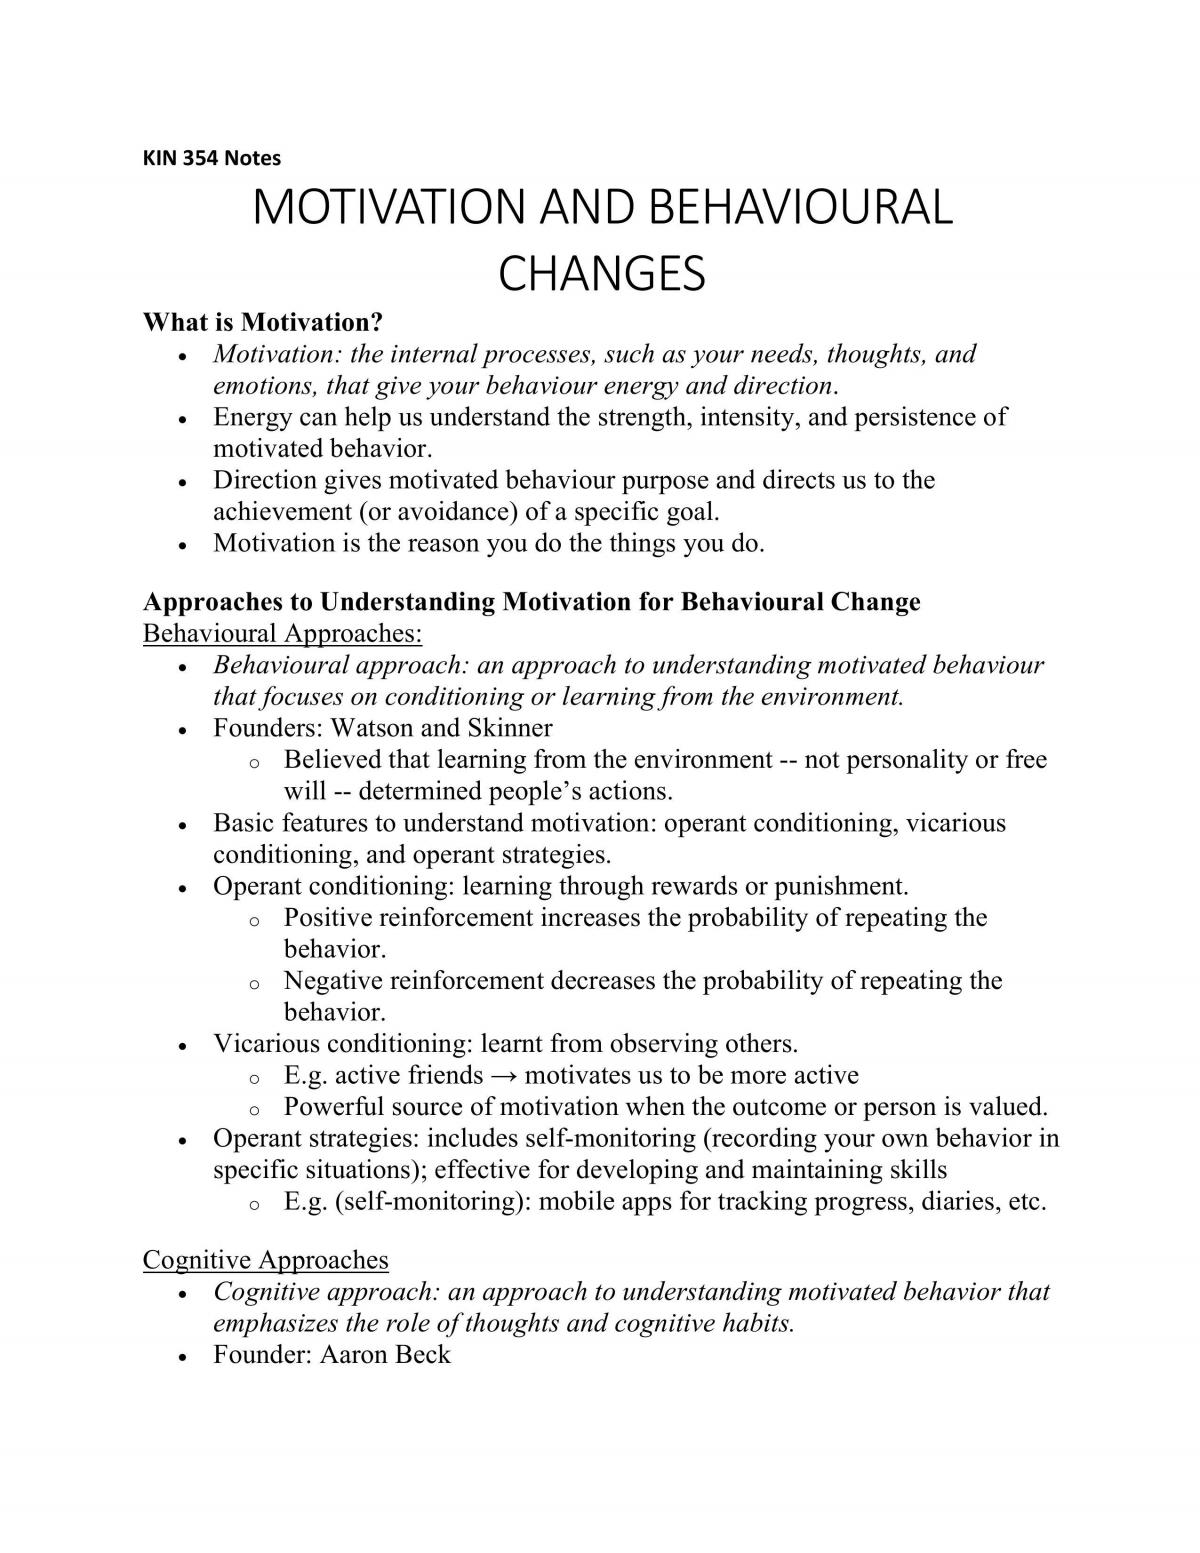 Motivational and Behavioural Changes & Stress, Emotion, and Coping in SE - Page 1